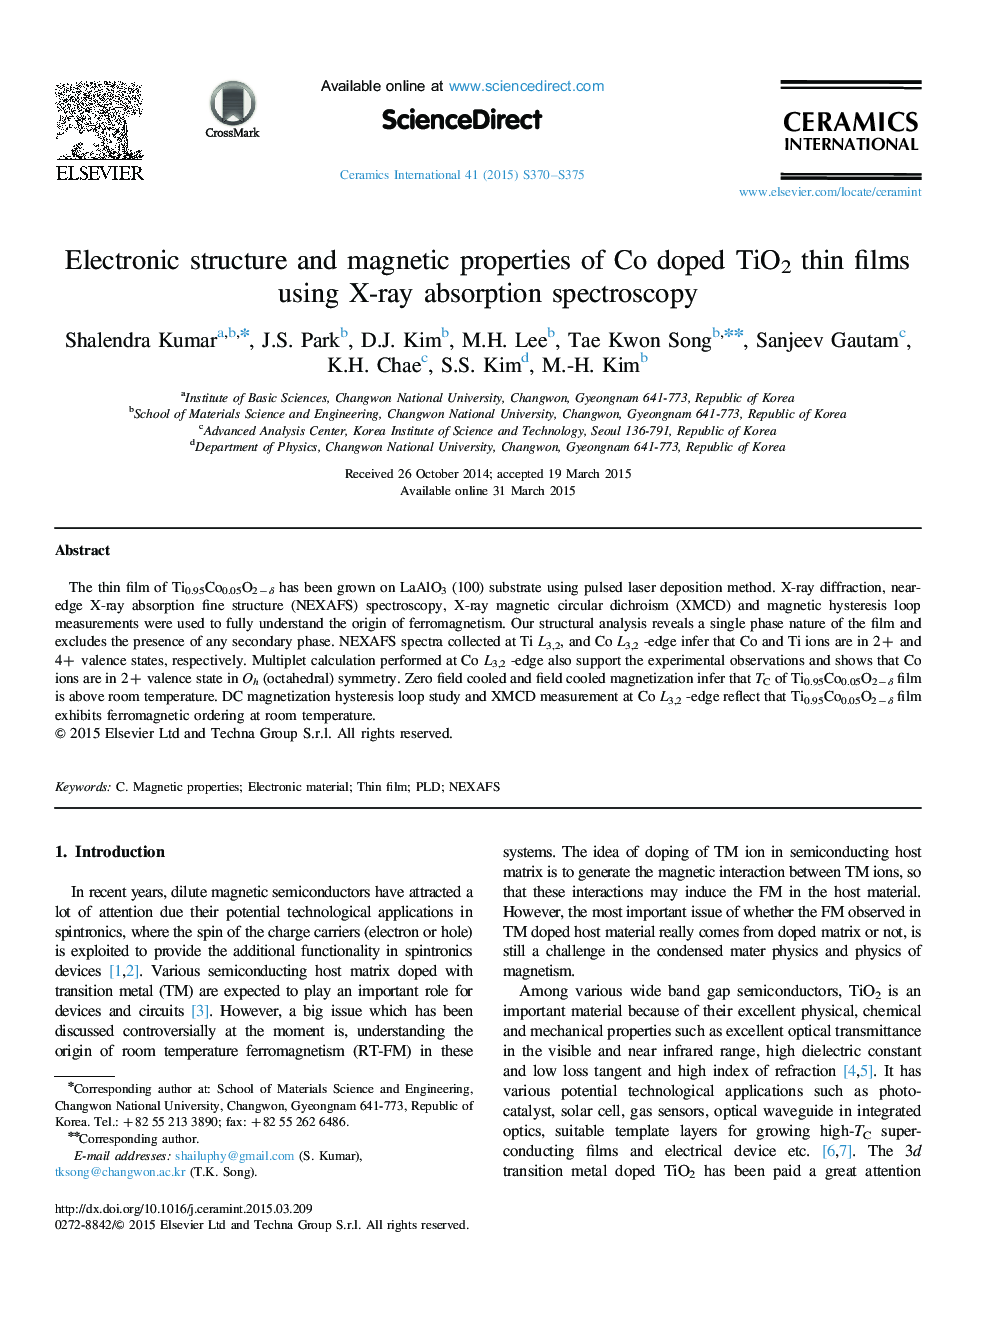 Electronic structure and magnetic properties of Co doped TiO2 thin films using X-ray absorption spectroscopy